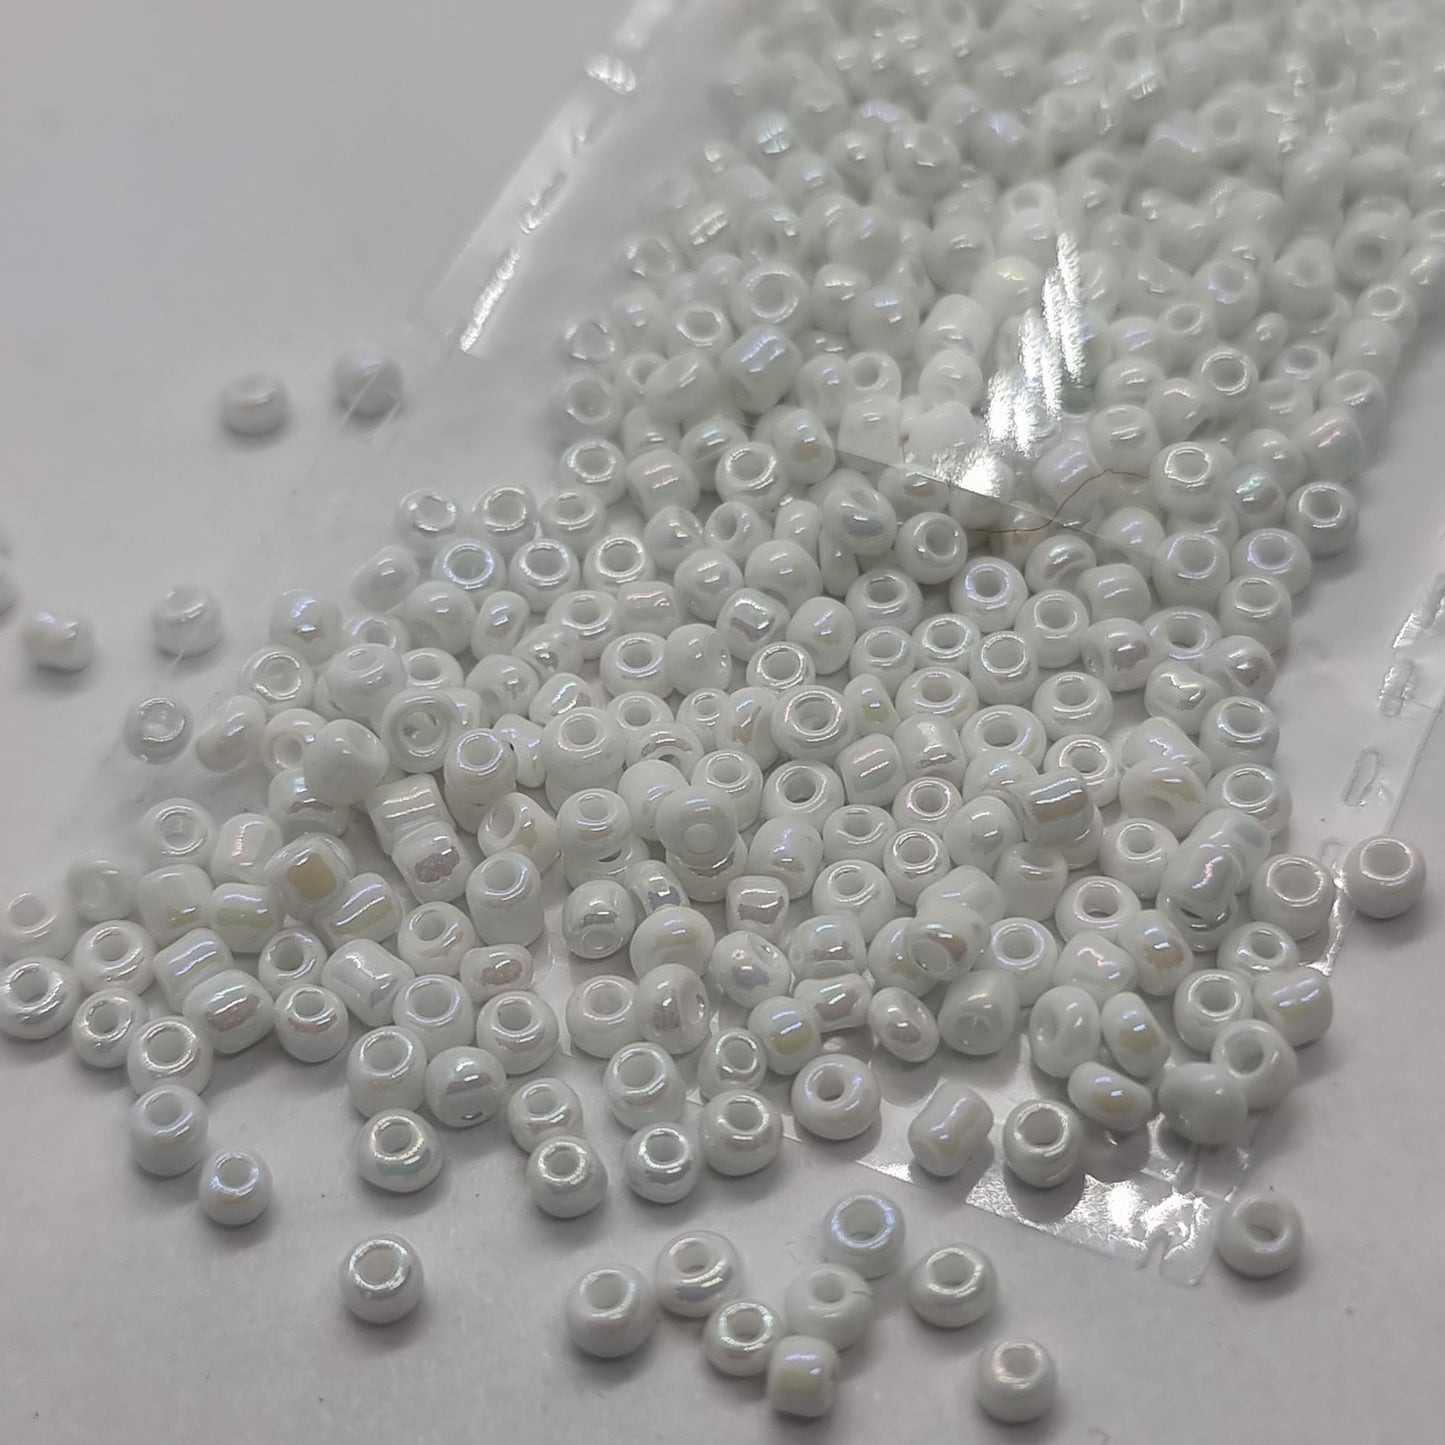 15g 2mm White AB Glass Seed Beads